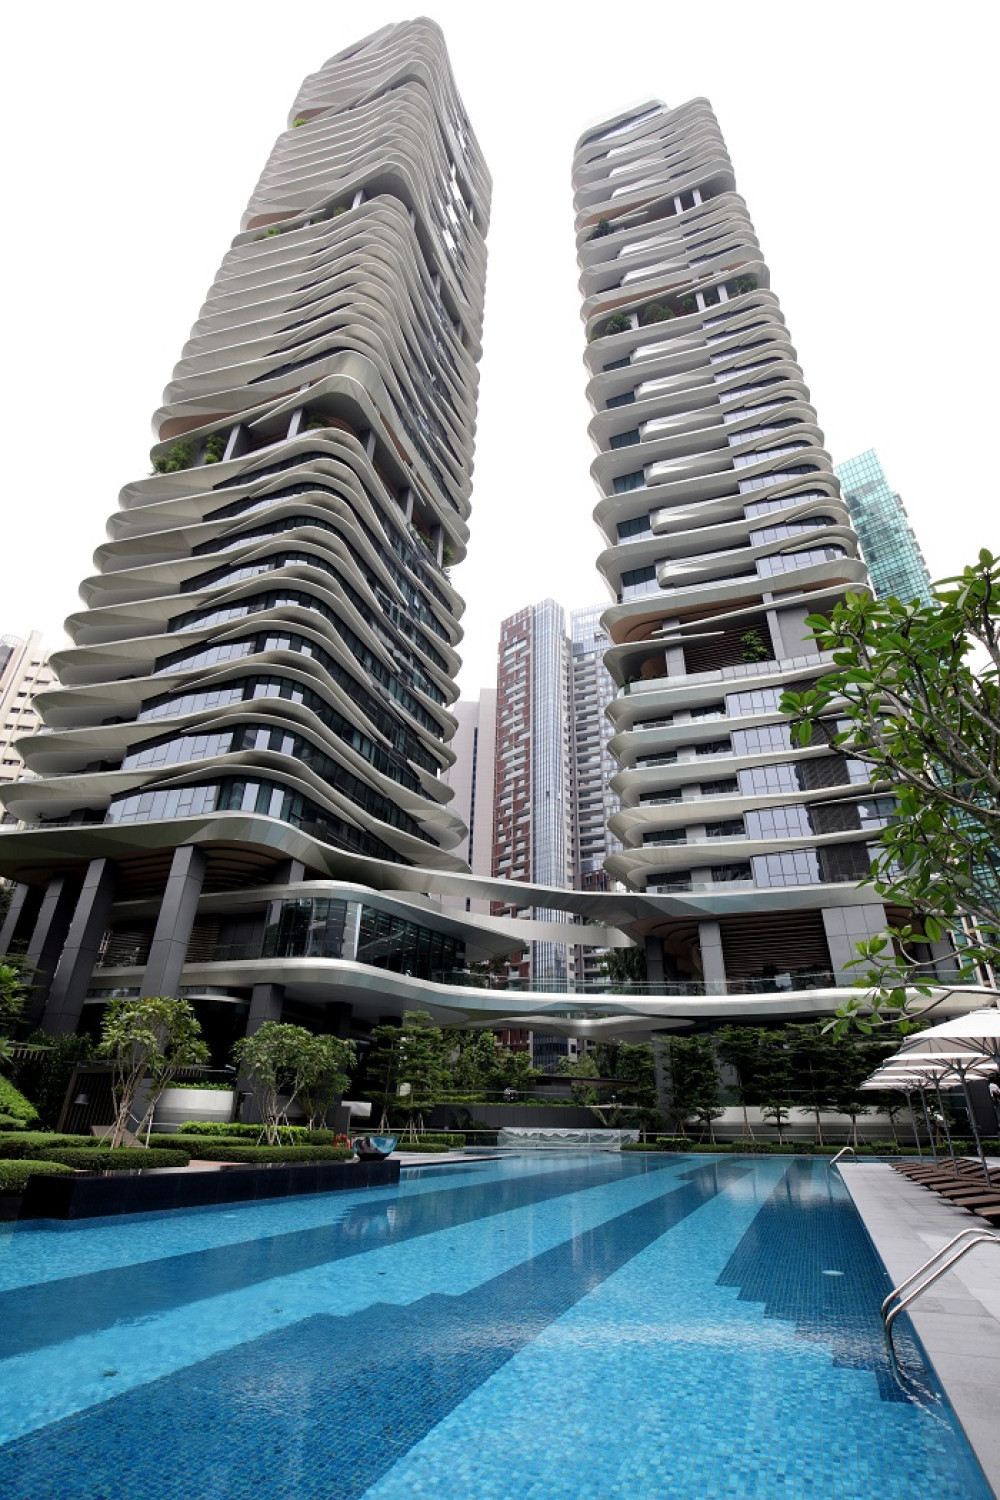 Overseas buyers snapping up units at new luxury condos - Property News